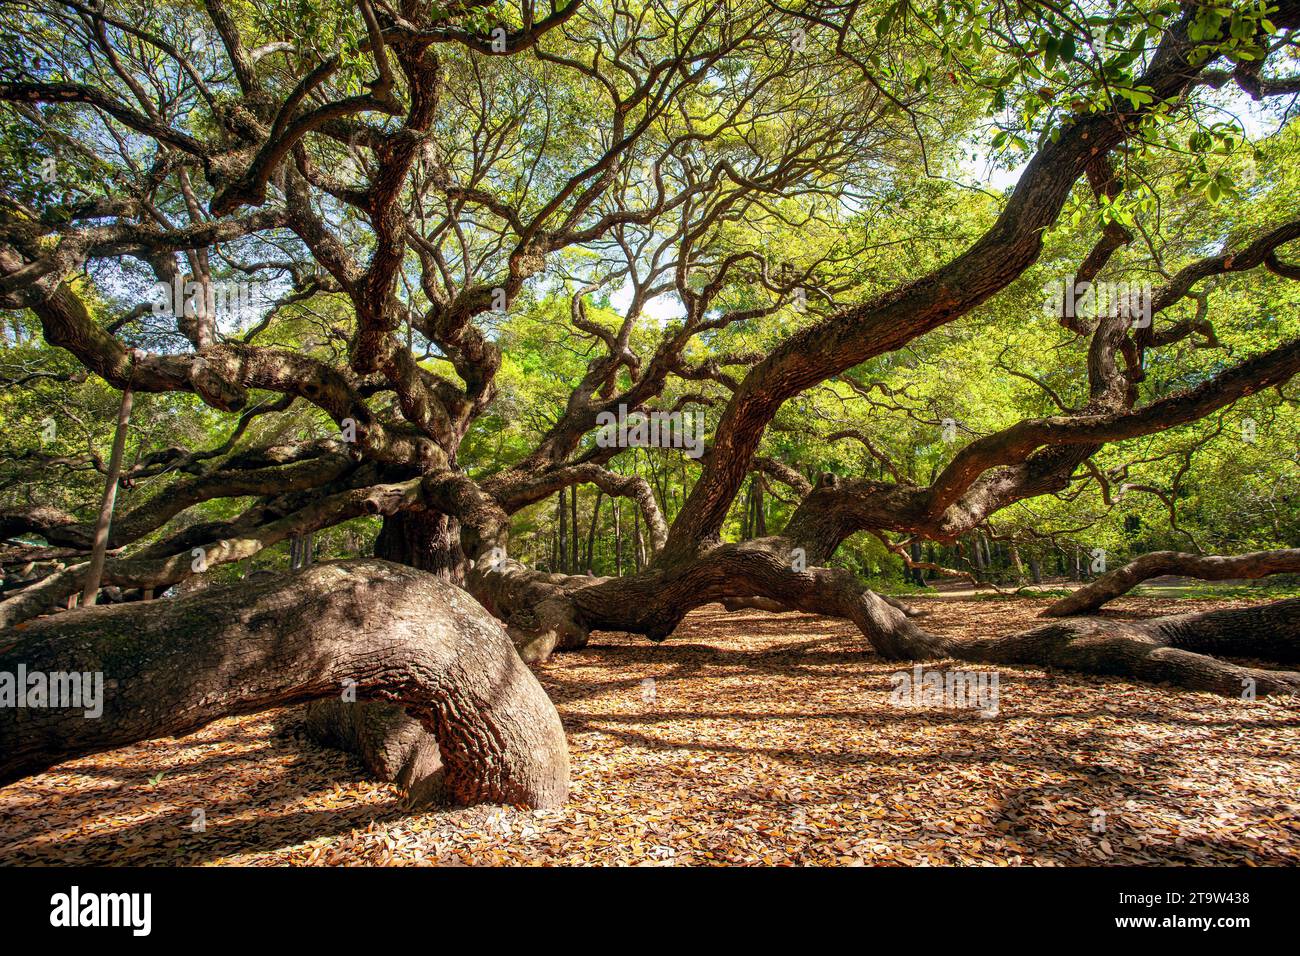 Majestic is the word that comes to mind while viewing this sprawling, ancient oak tree on John's Island, near Charleston, South Carolina. It is though Stock Photo